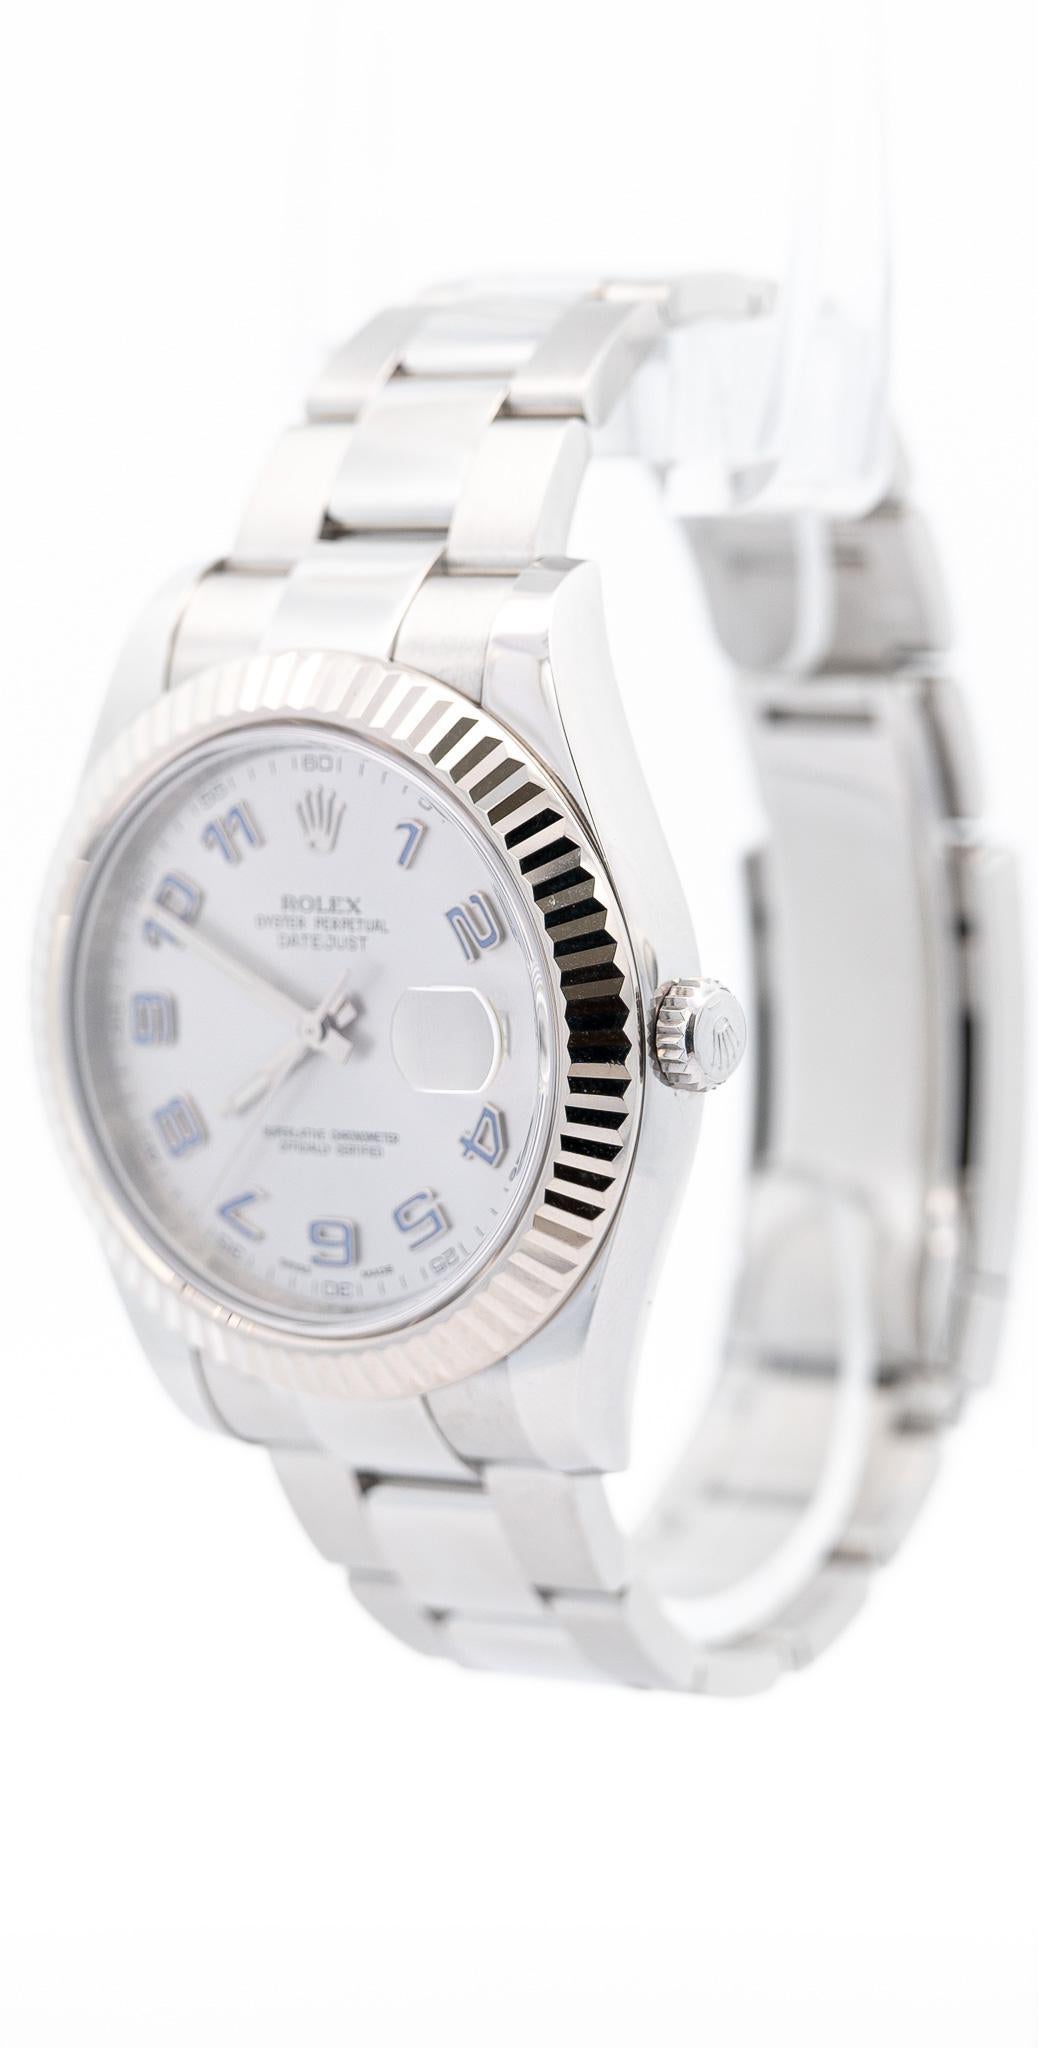 Rolex Datejust II Men's 41mm Stainless Steel Watch 116334 - Automatic movement, 31 jewels, Quickset, scratch resistant sapphire crystal. Stainless steel case with 18k white gold fluted bezel. 41mm dial and screw down crown. Rhodium dial with purple